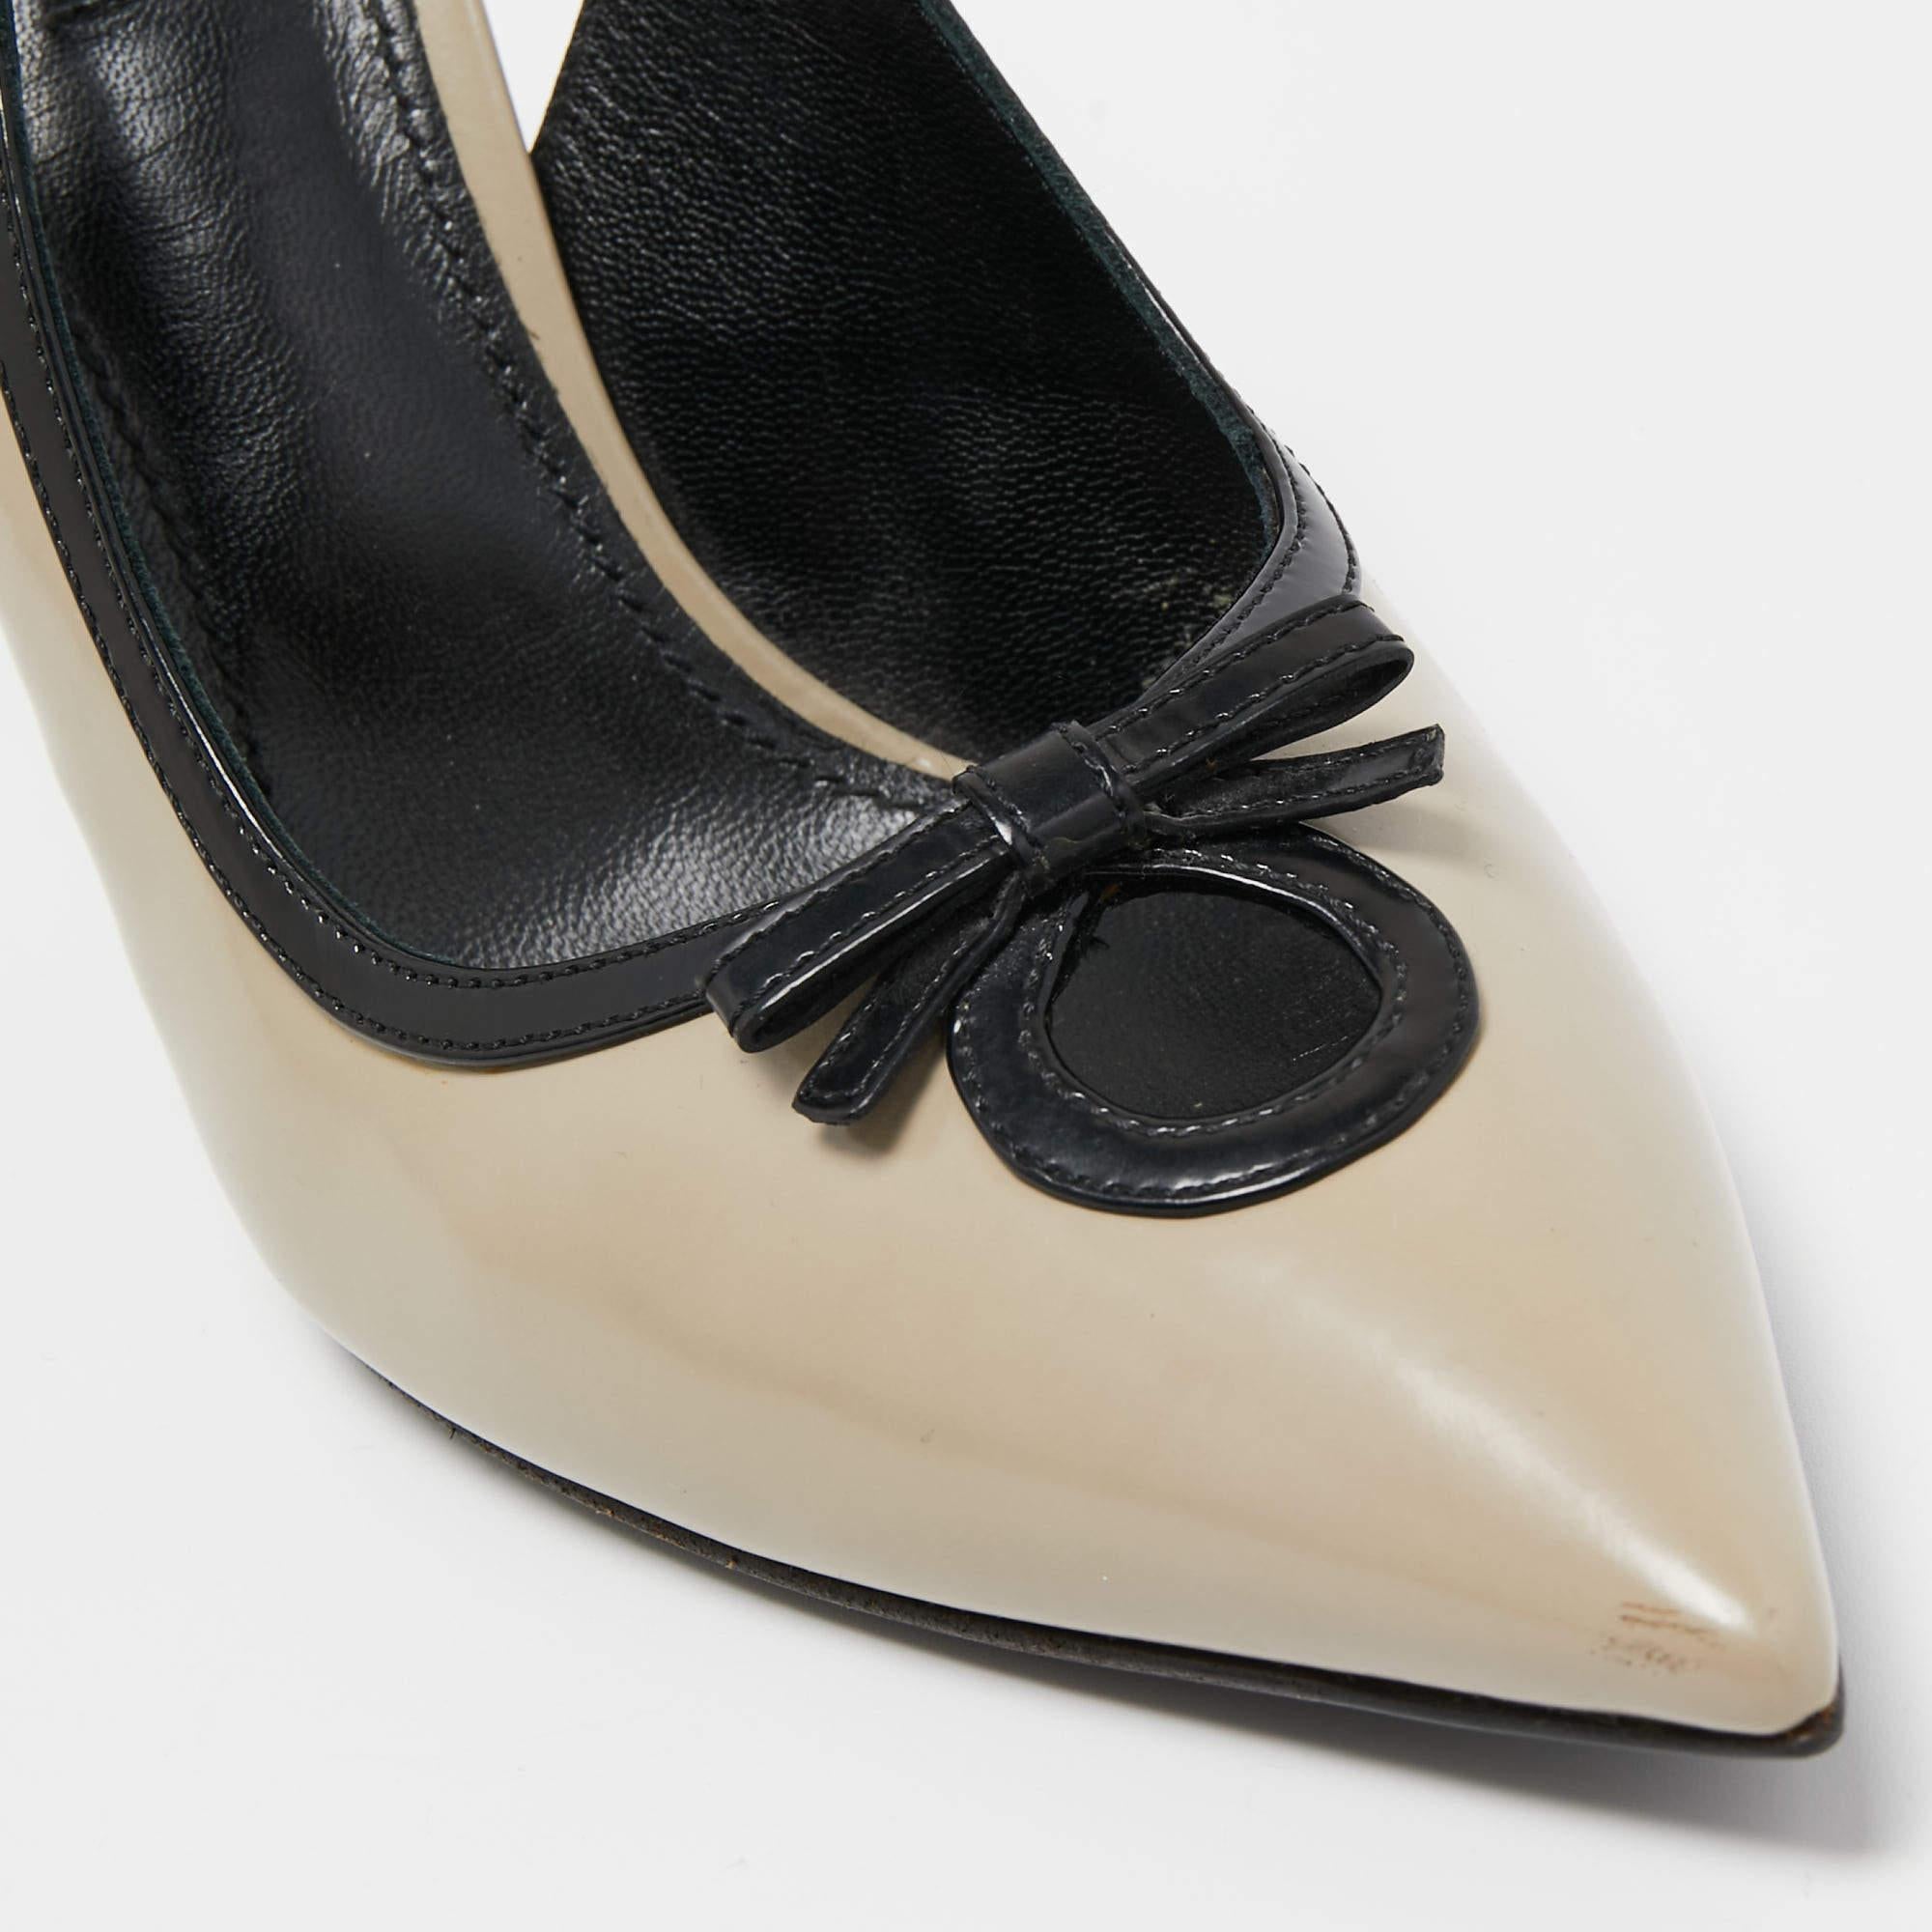 Dolce & Gabbana Grey/Black Patent Bow Detail Pointed Toe Slingback Pumps Size 40 2